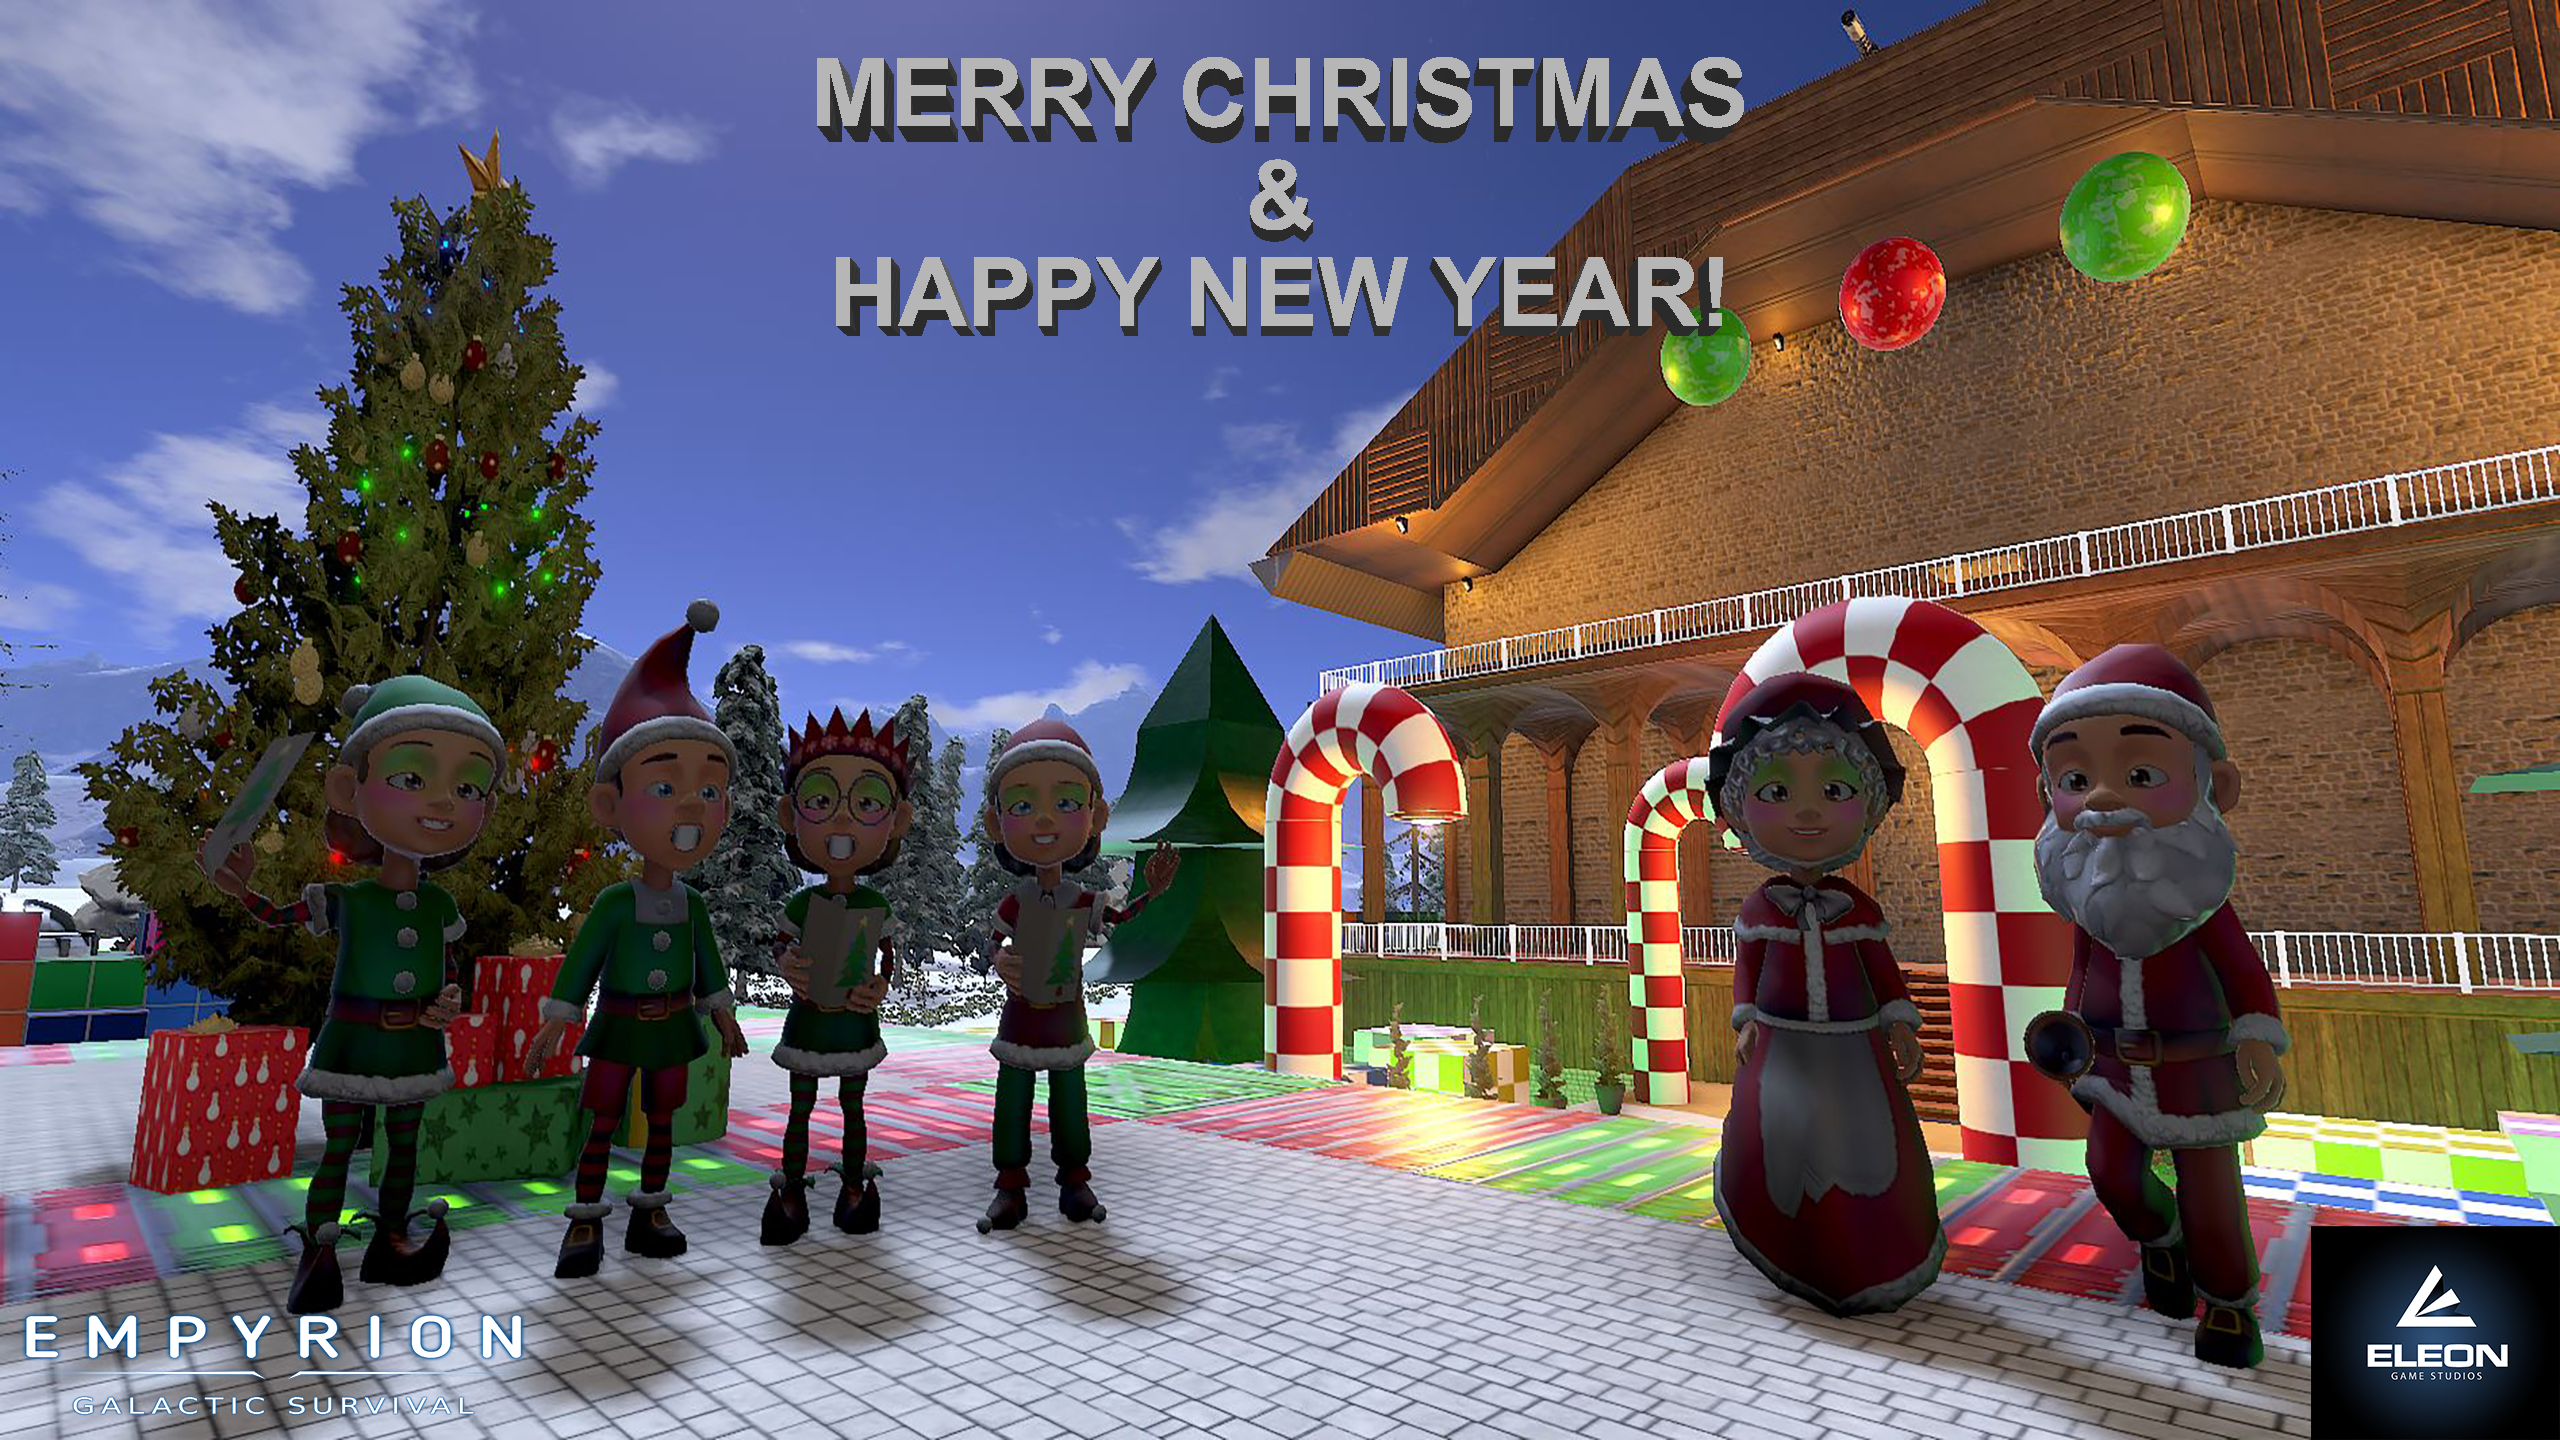 ChristmasCard.png